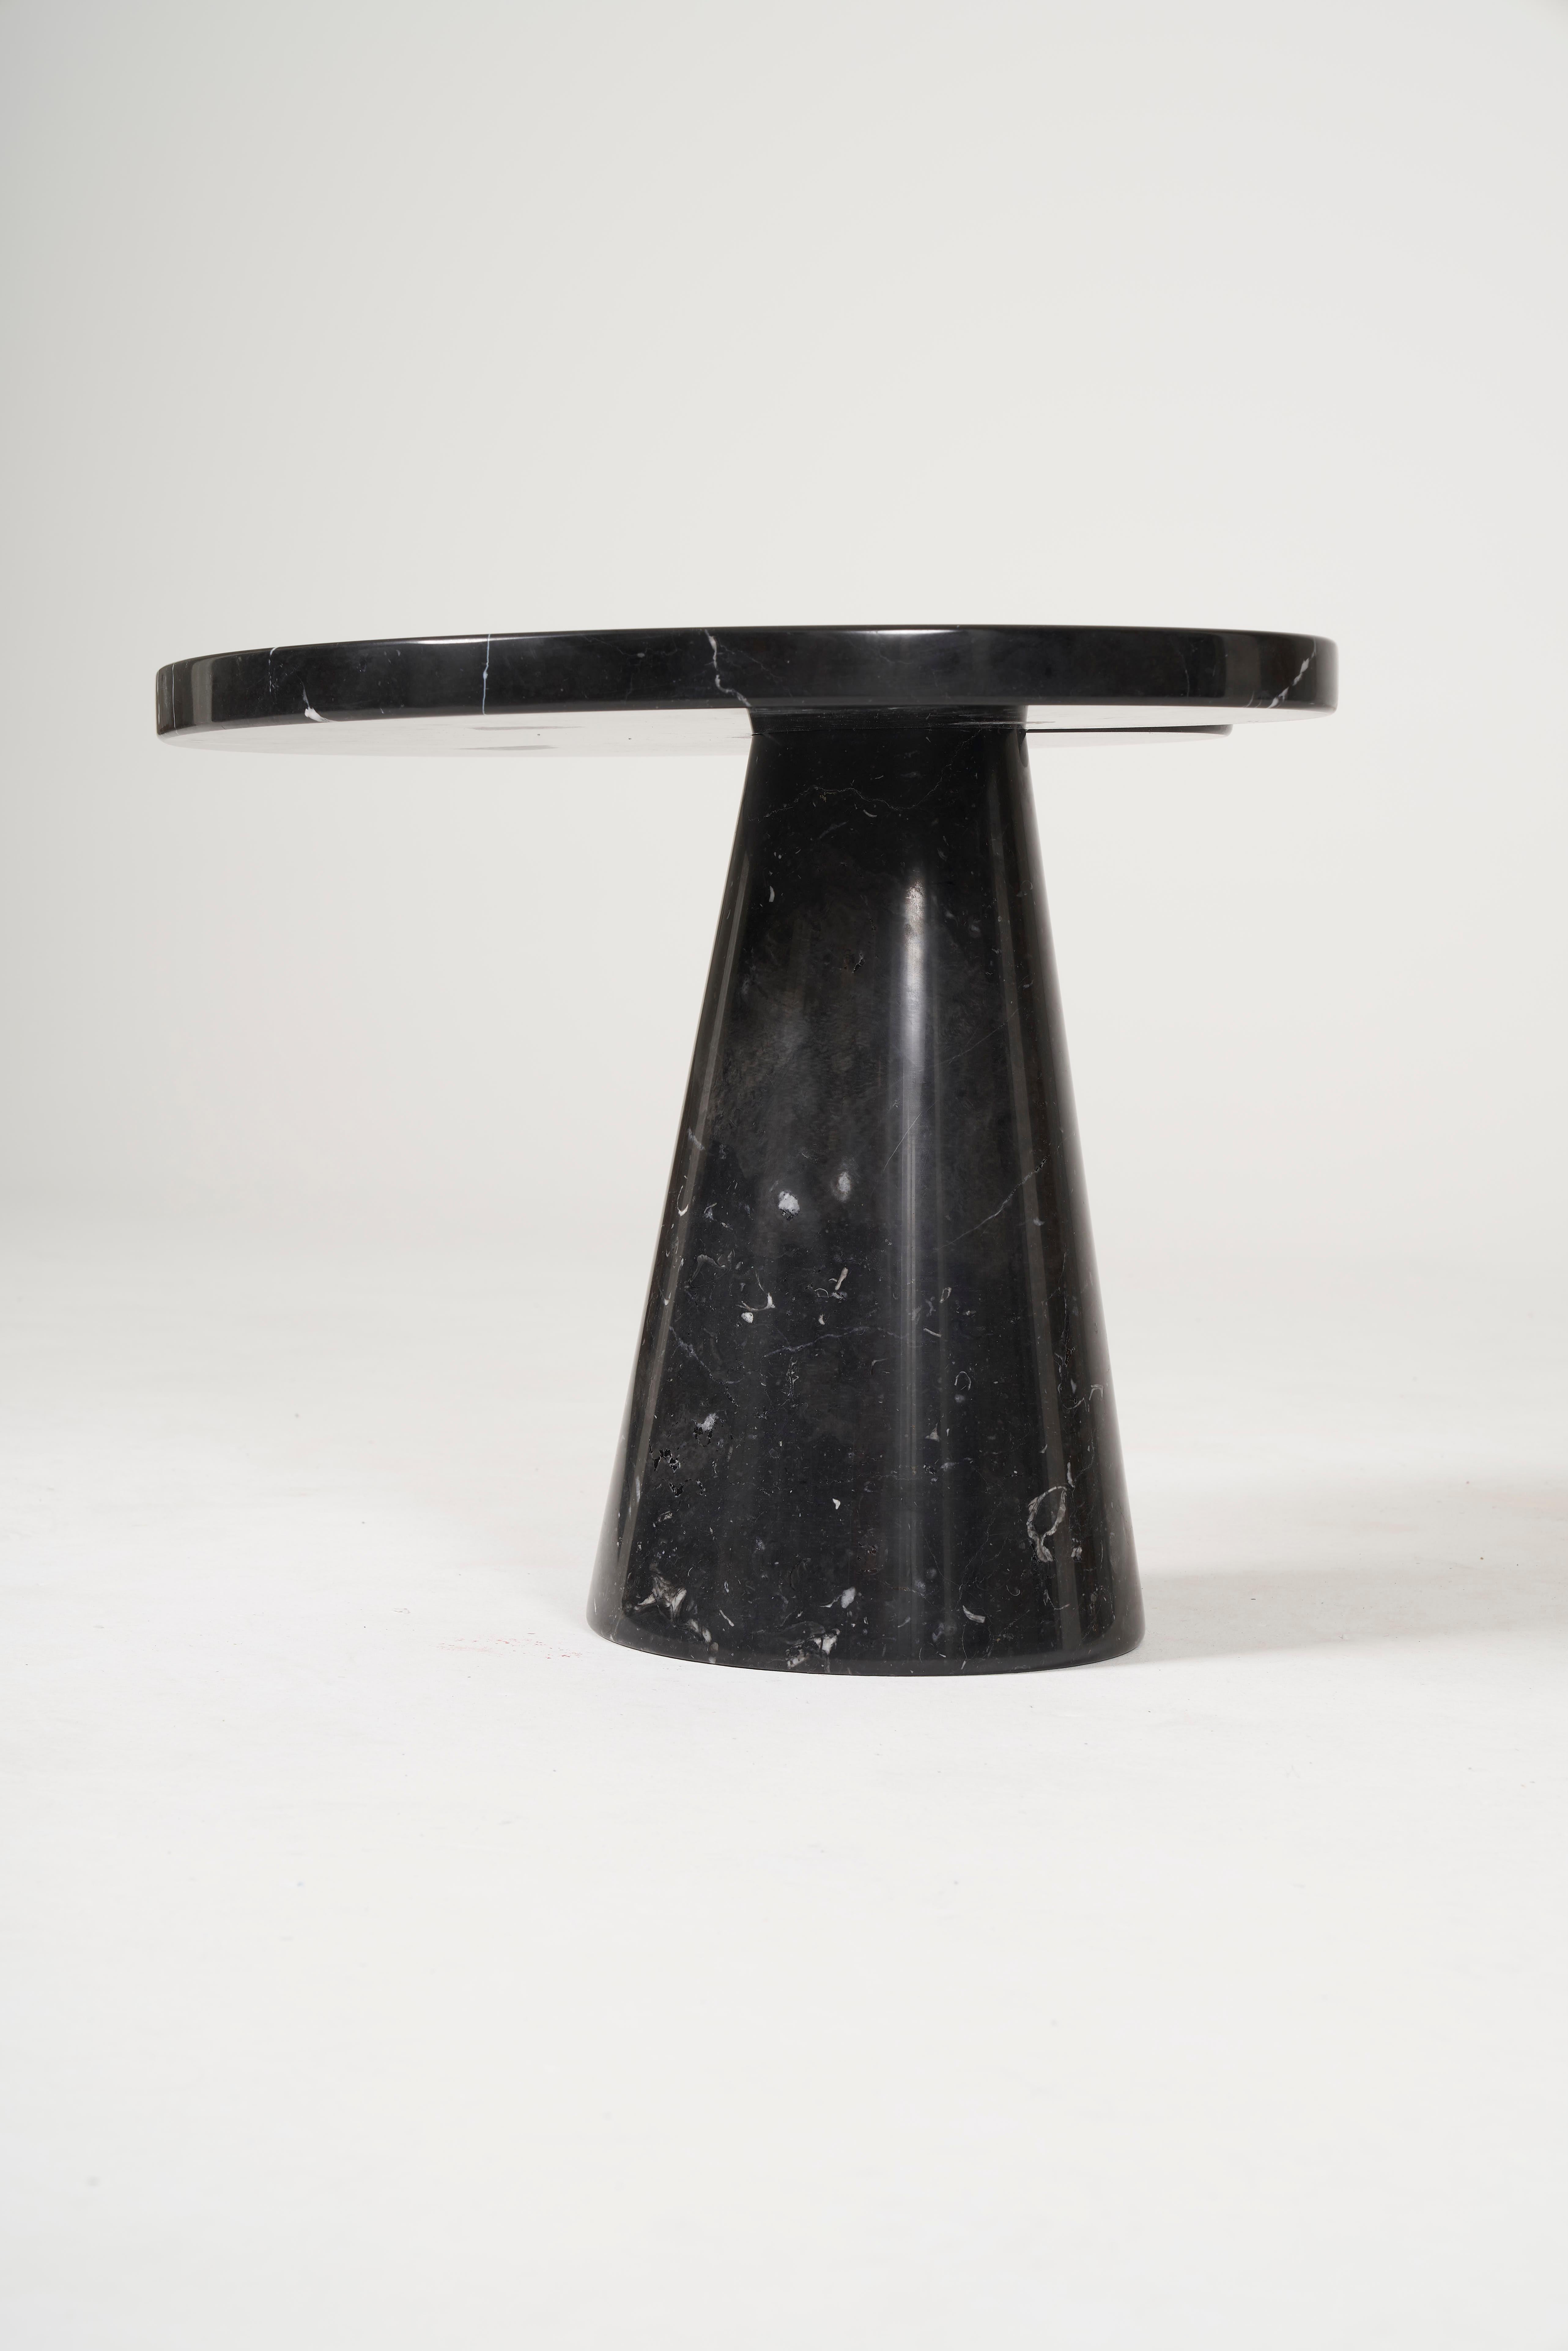 Eros side table (tall model) in Nero Marquina marble by Italian designer Angelo Mangiarotti, created in 1971 for Skipper. A flagship table from the 1970s, conceived by an exceptional designer known for his controlled approach to materials. Minor